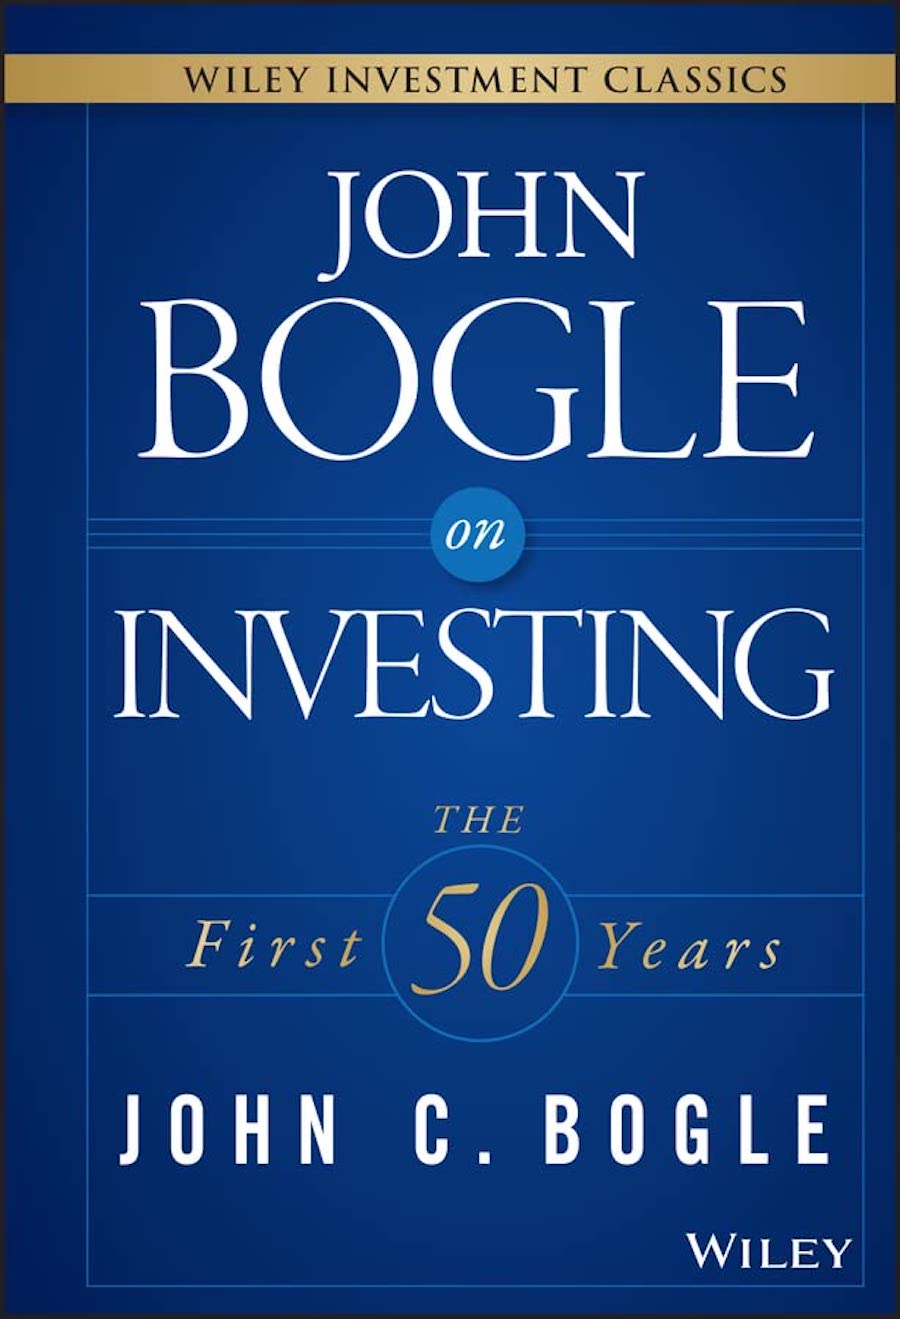 John Bogle on Investing (Wiley Investment Classics) 2